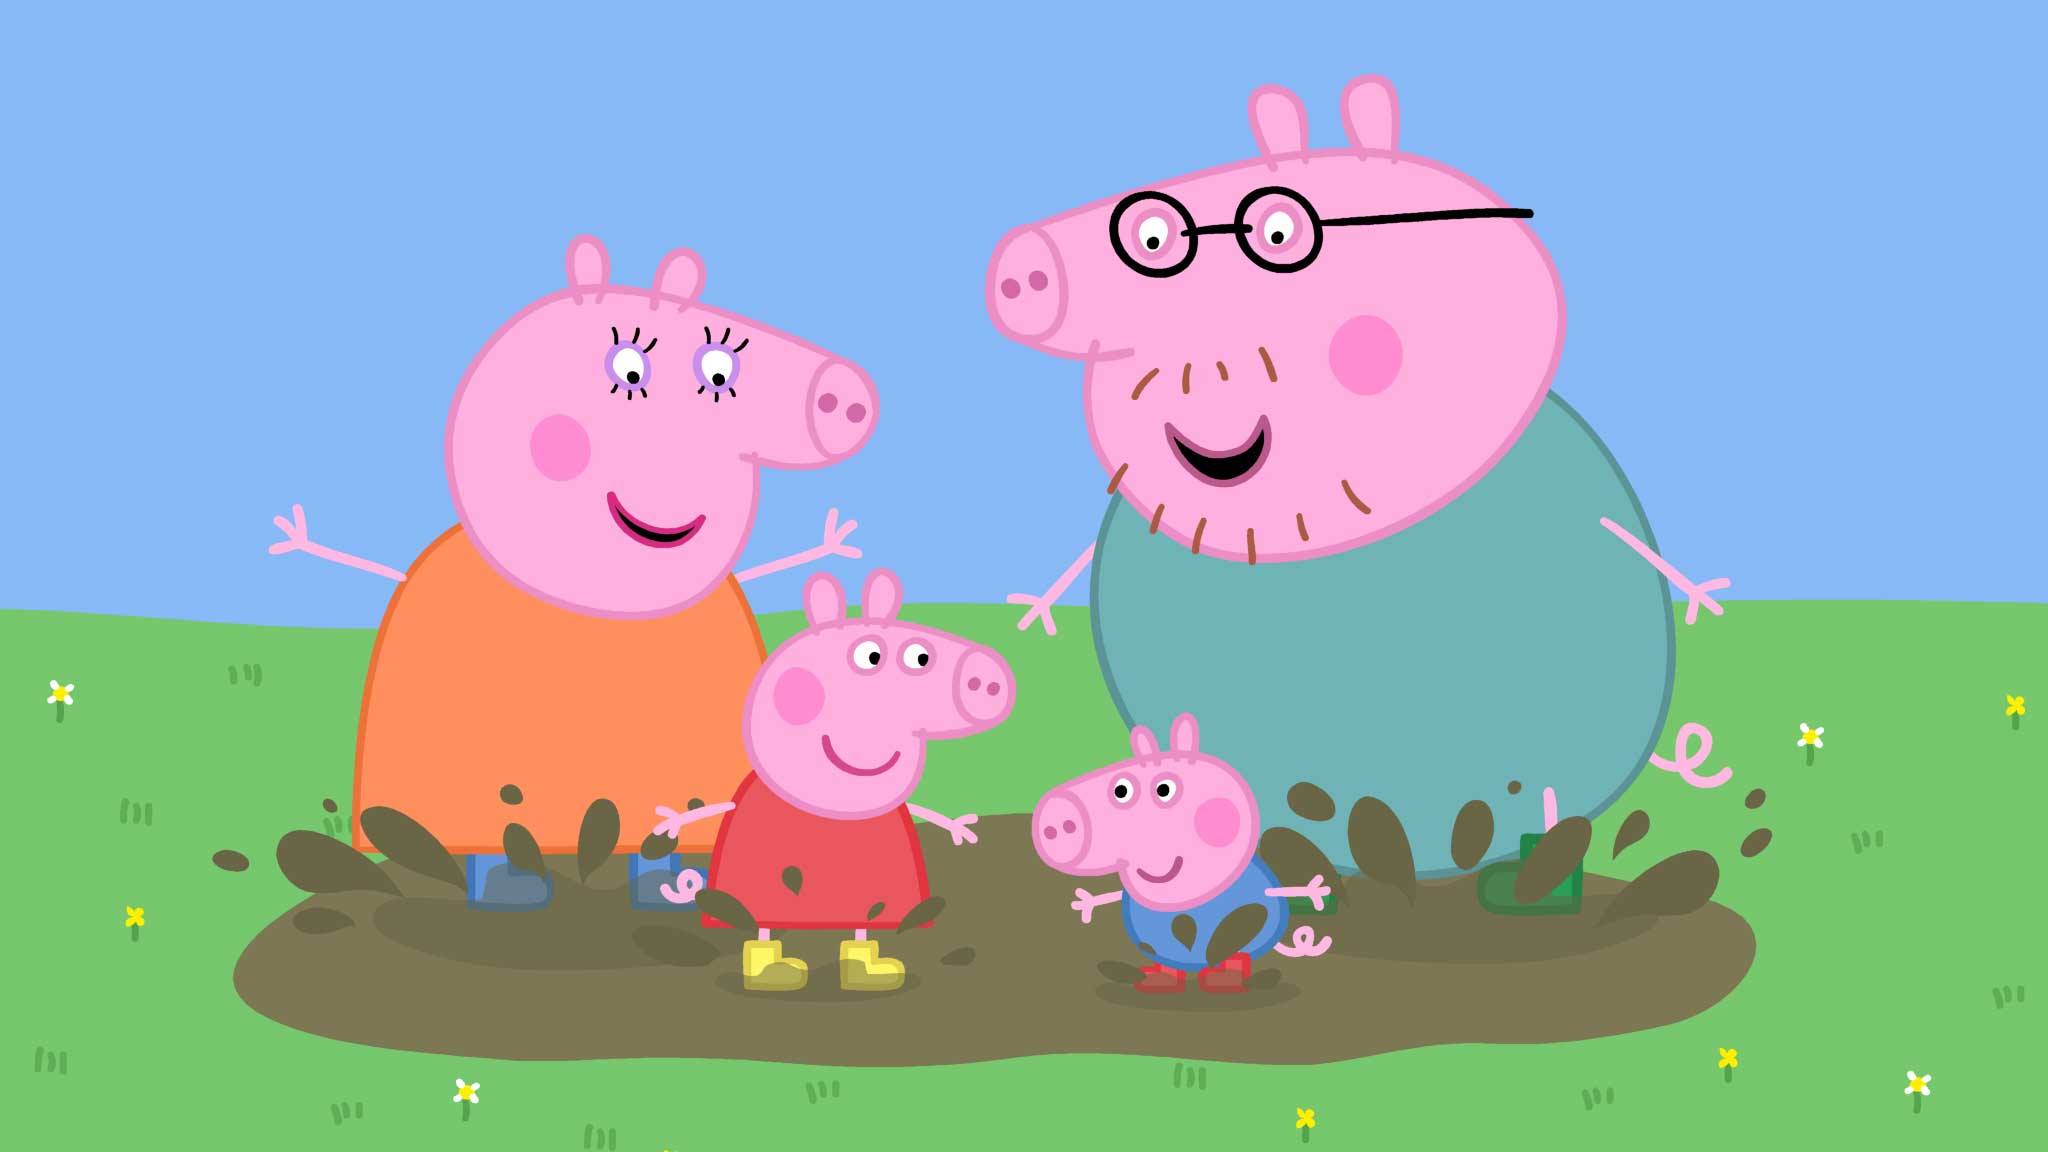 Playtime with Peppa Pig